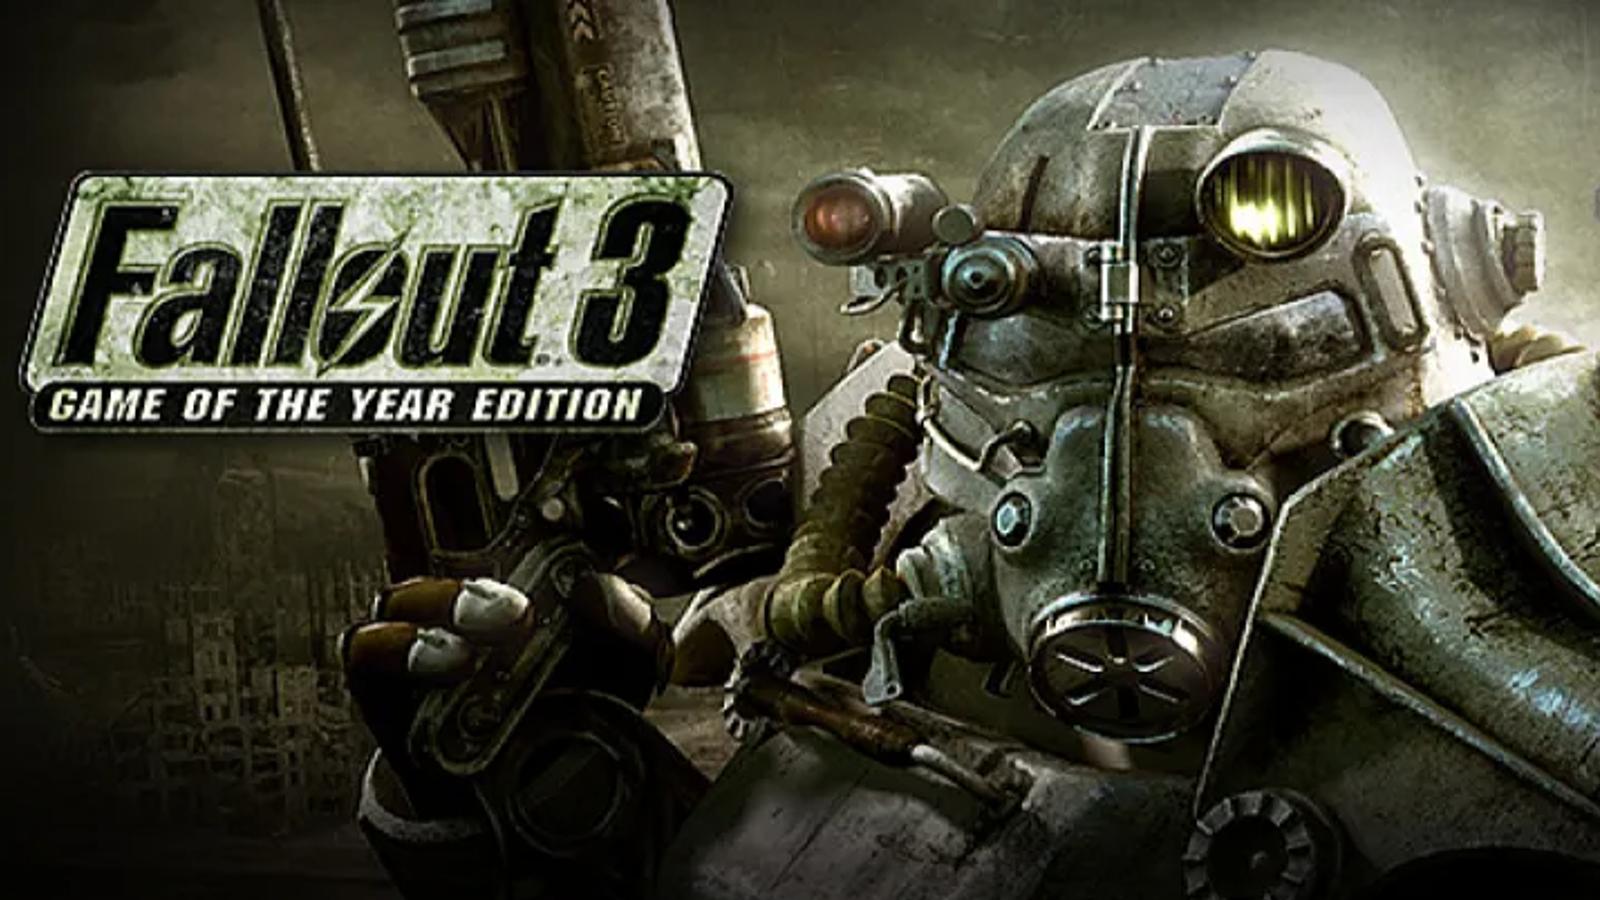 Fallout 3 Remaster potentially teased for a 2019 release date